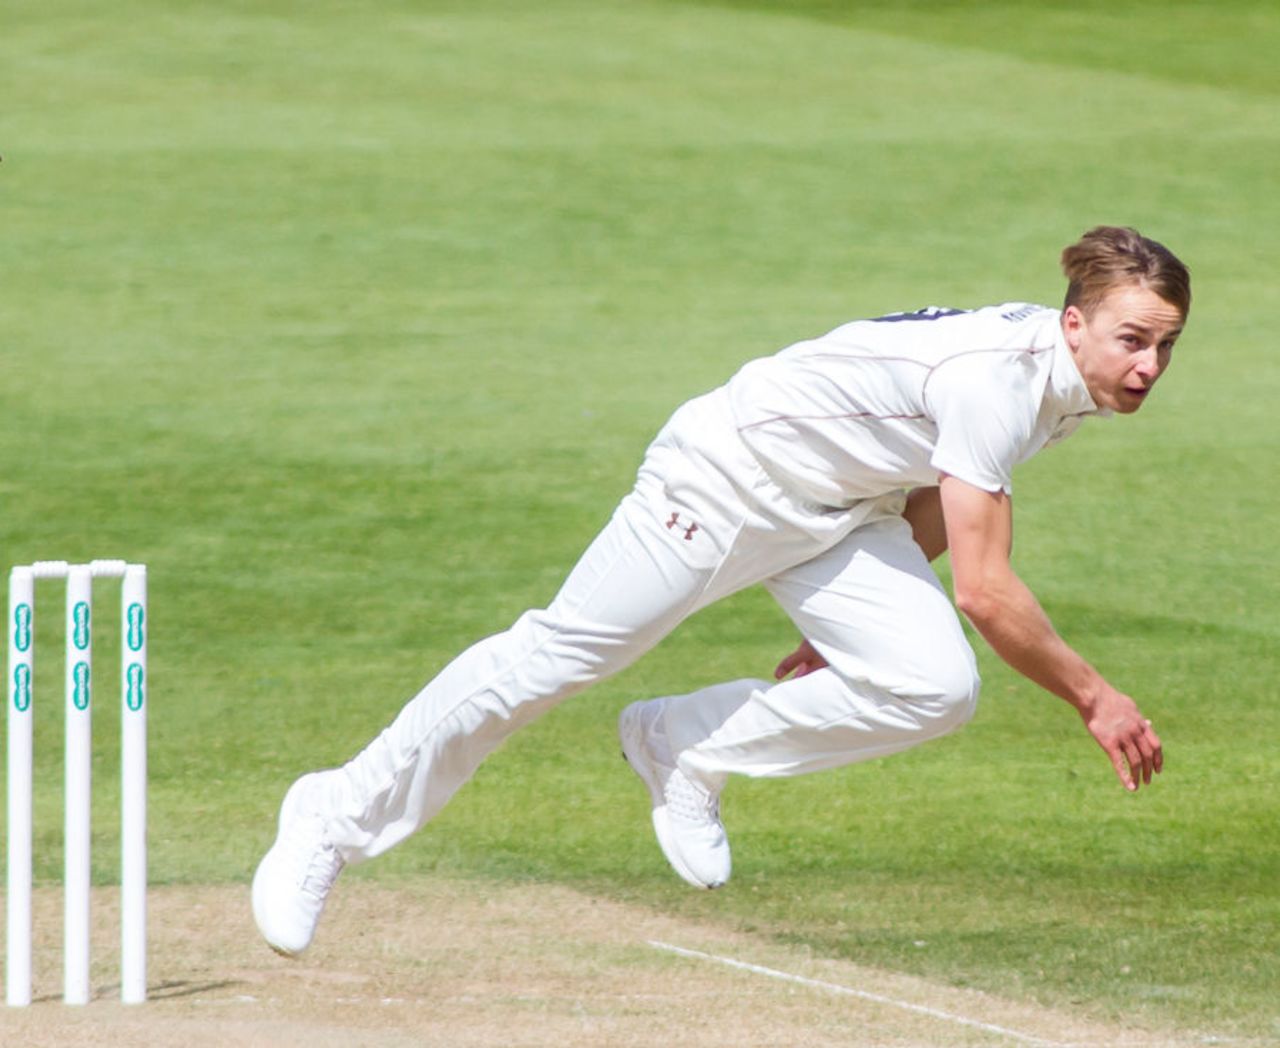 Tom Curran in action for Surrey, Surrey v Somerset, Specsavers Championship Division One, Kia Oval, April 26, 2016